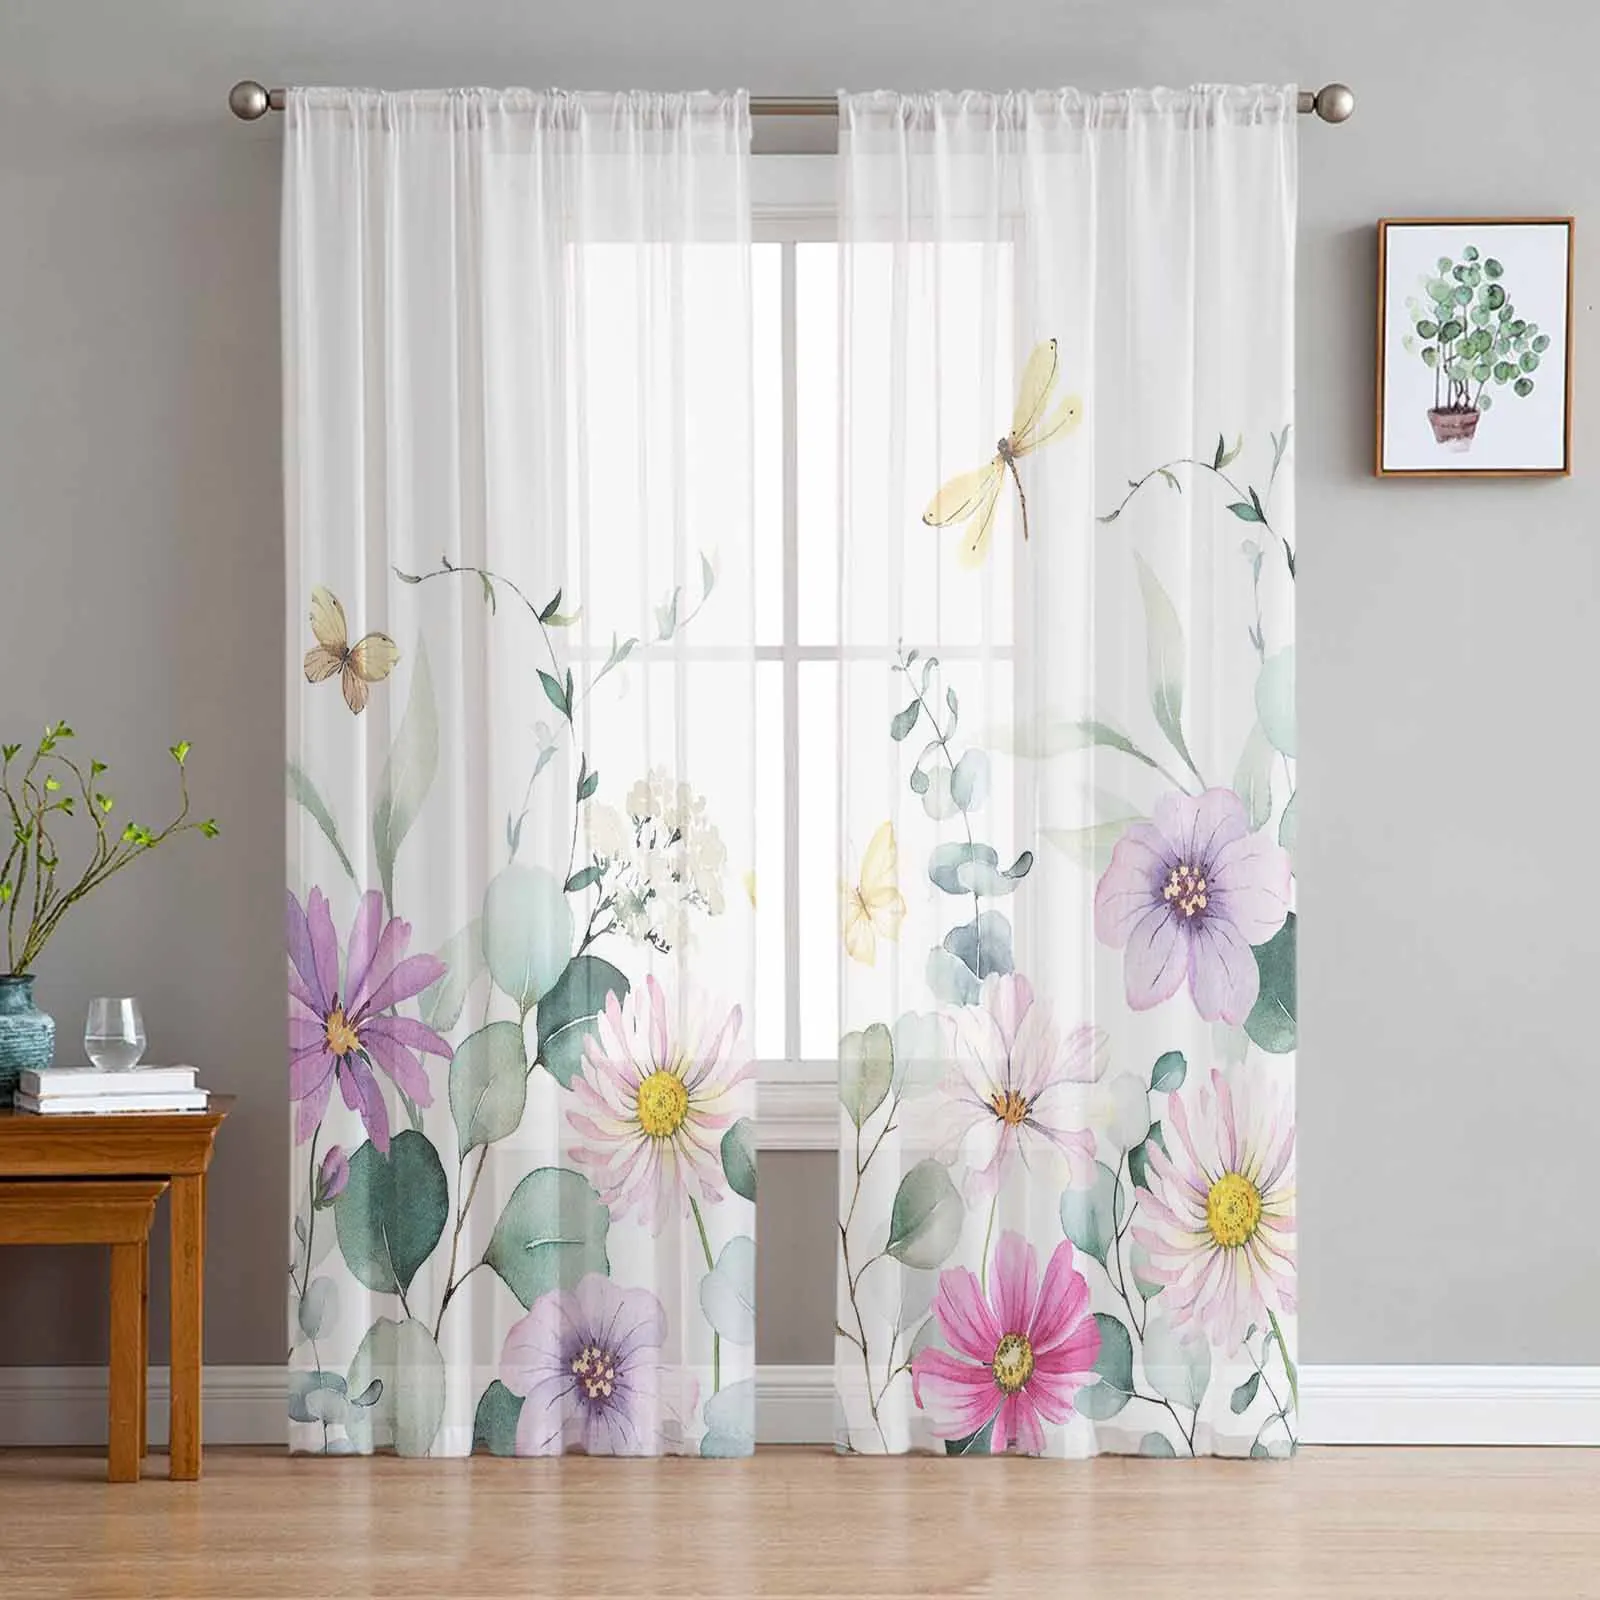 

Idyllic Eucalyptus Daisy Wildflowers Sheer Curtains for Living Room Bedroom Tulle Curtain for Kitchen Voile Curtain Blind Panels